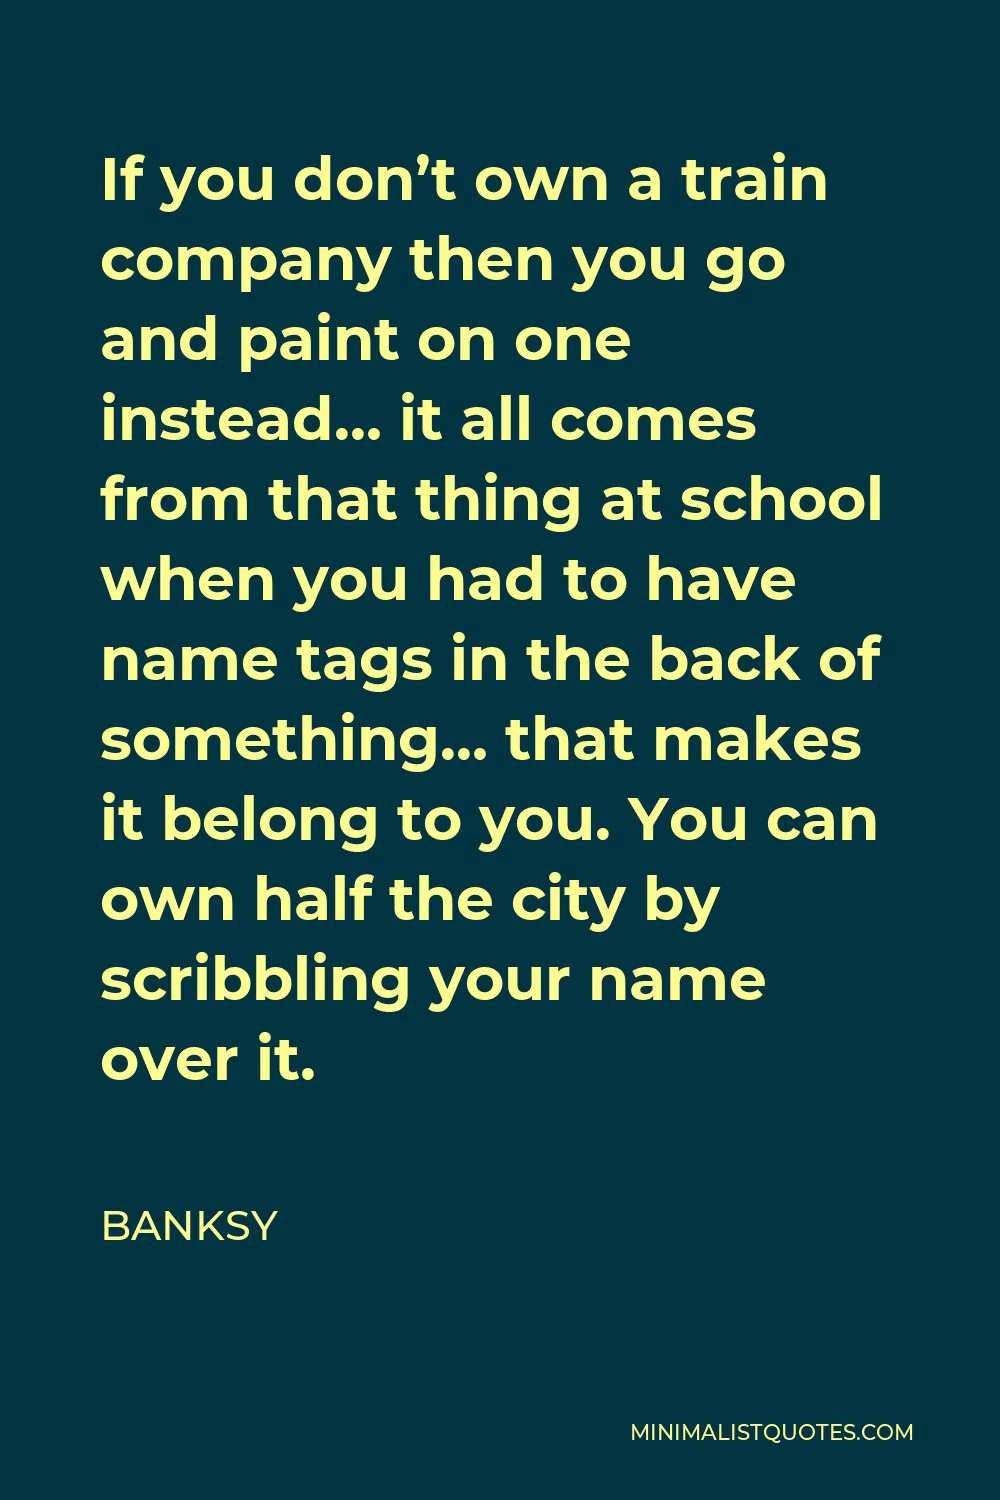 Banksy Quote - If you don’t own a train company then you go and paint on one instead… it all comes from that thing at school when you had to have name tags in the back of something… that makes it belong to you. You can own half the city by scribbling your name over it.